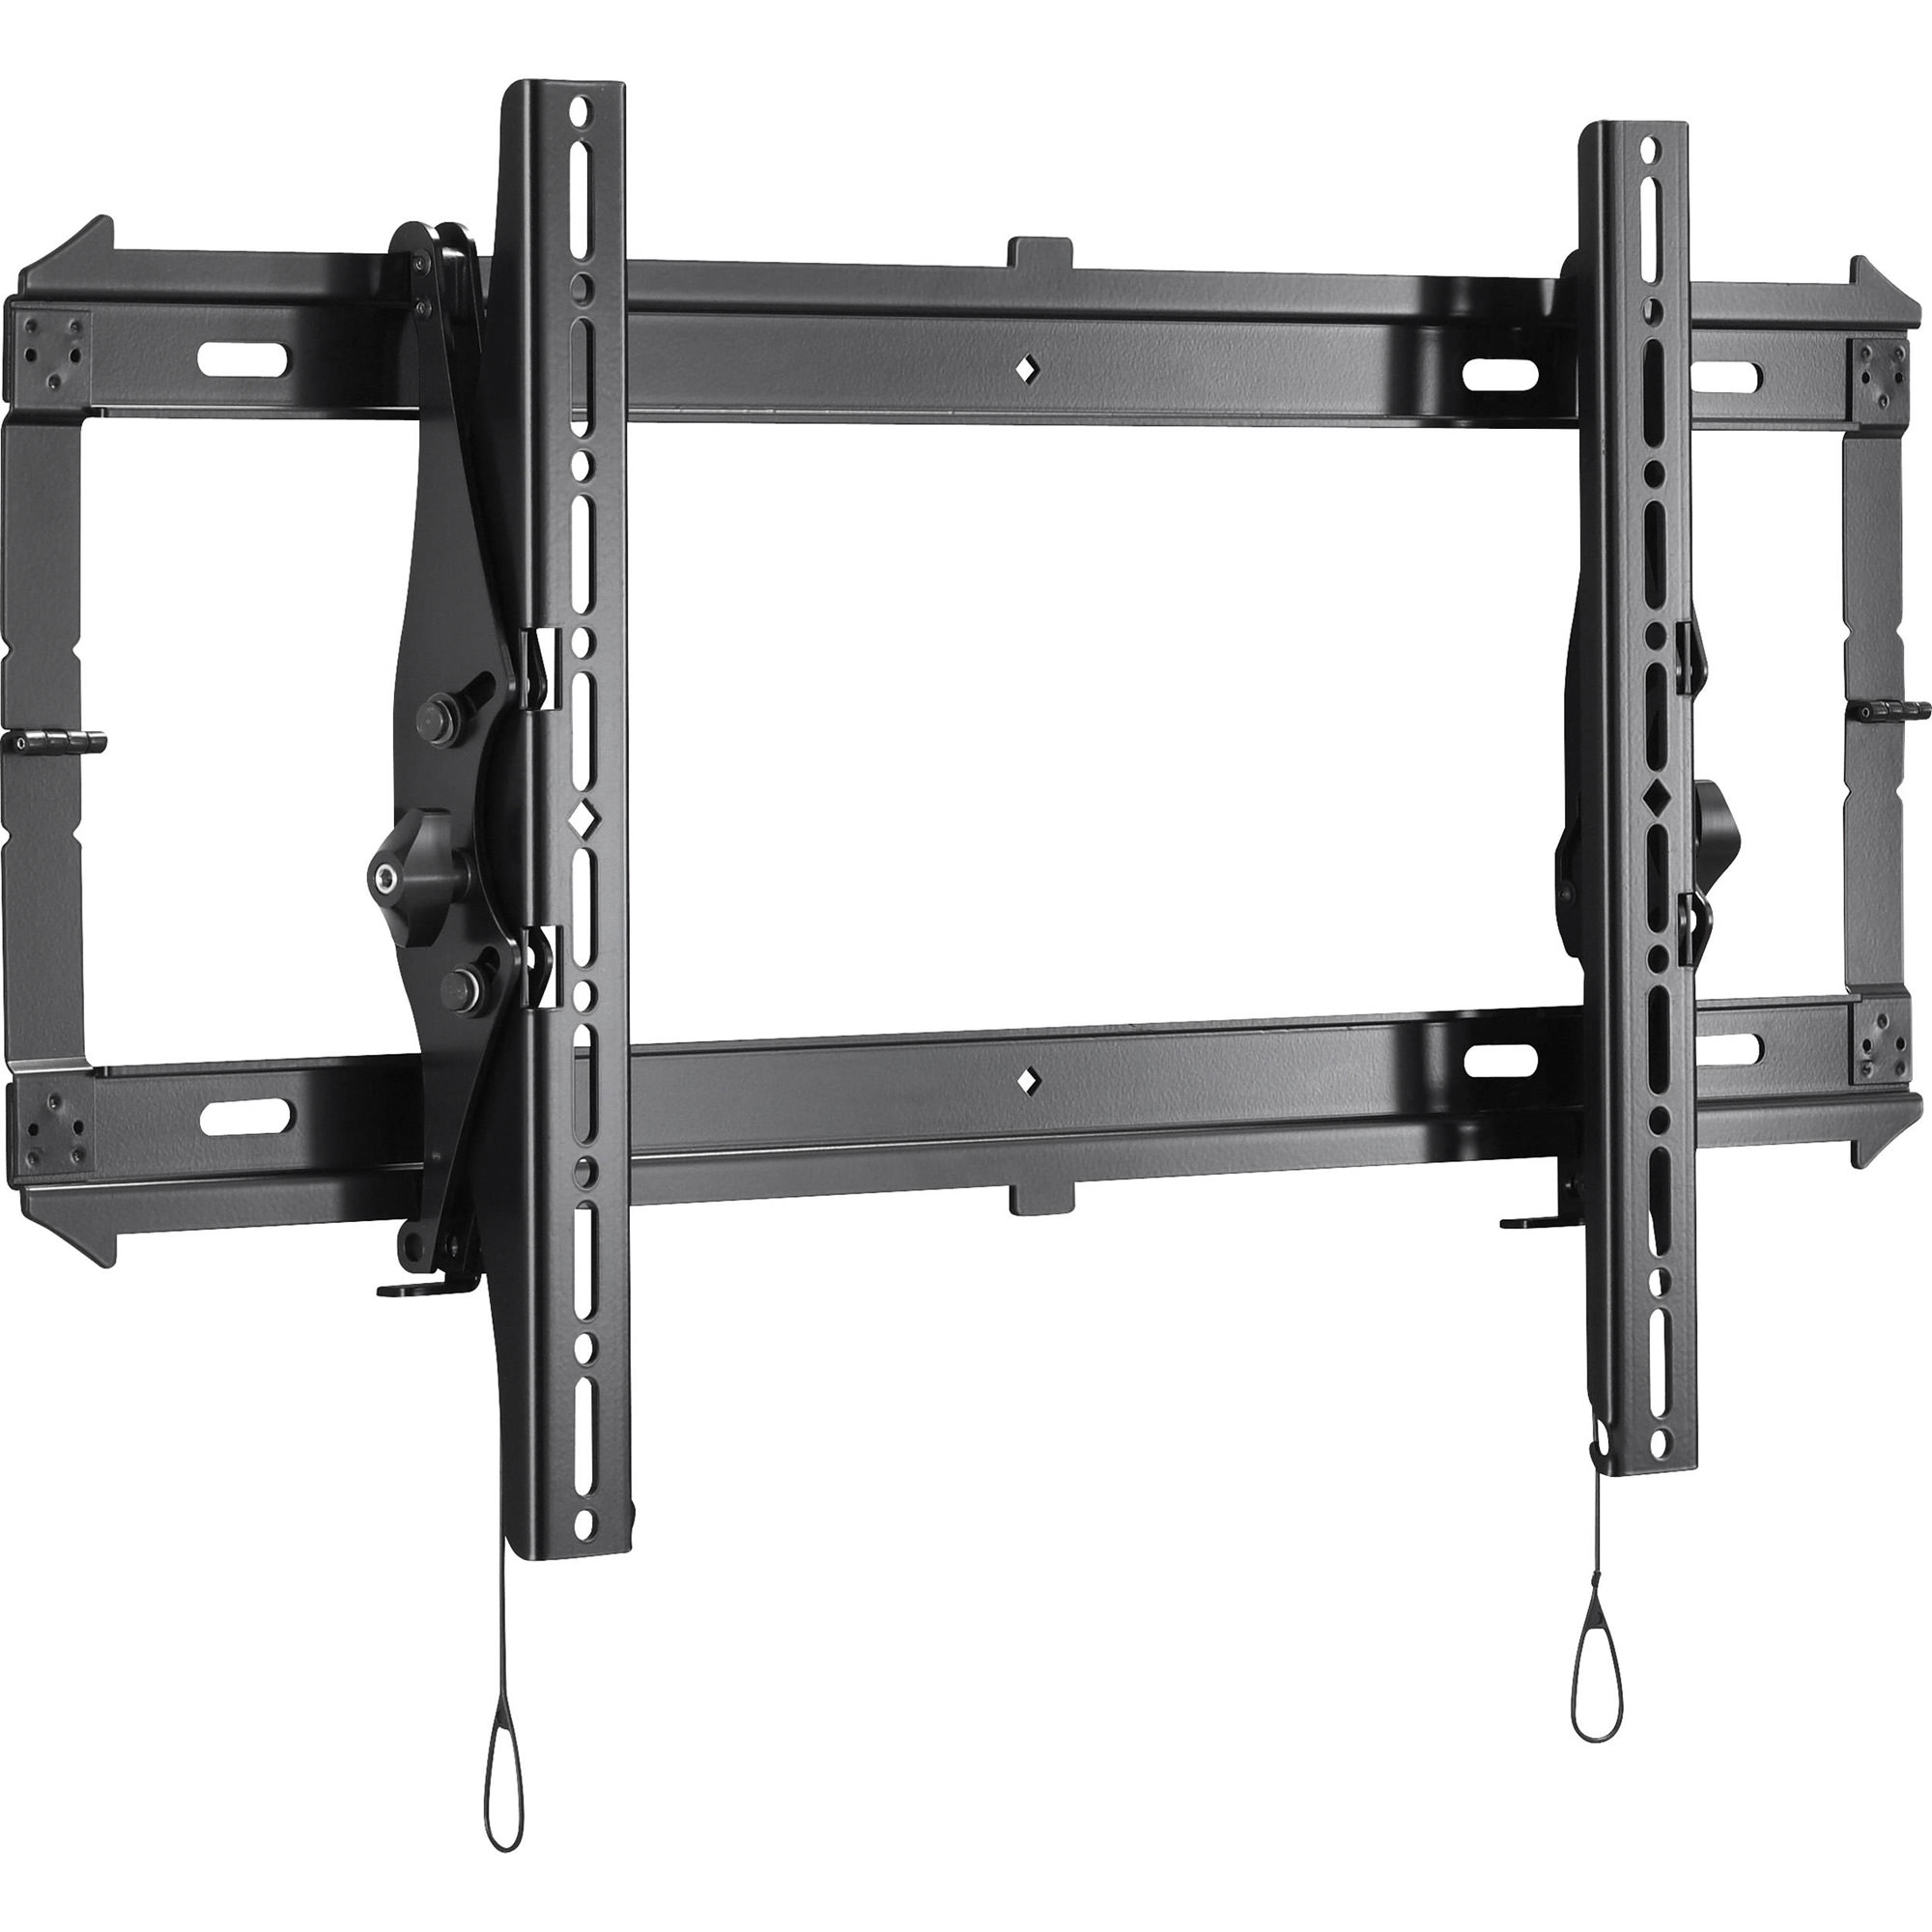 Chief RLT2 Large FIT™ Tilt Wall Mount - image 1 of 4